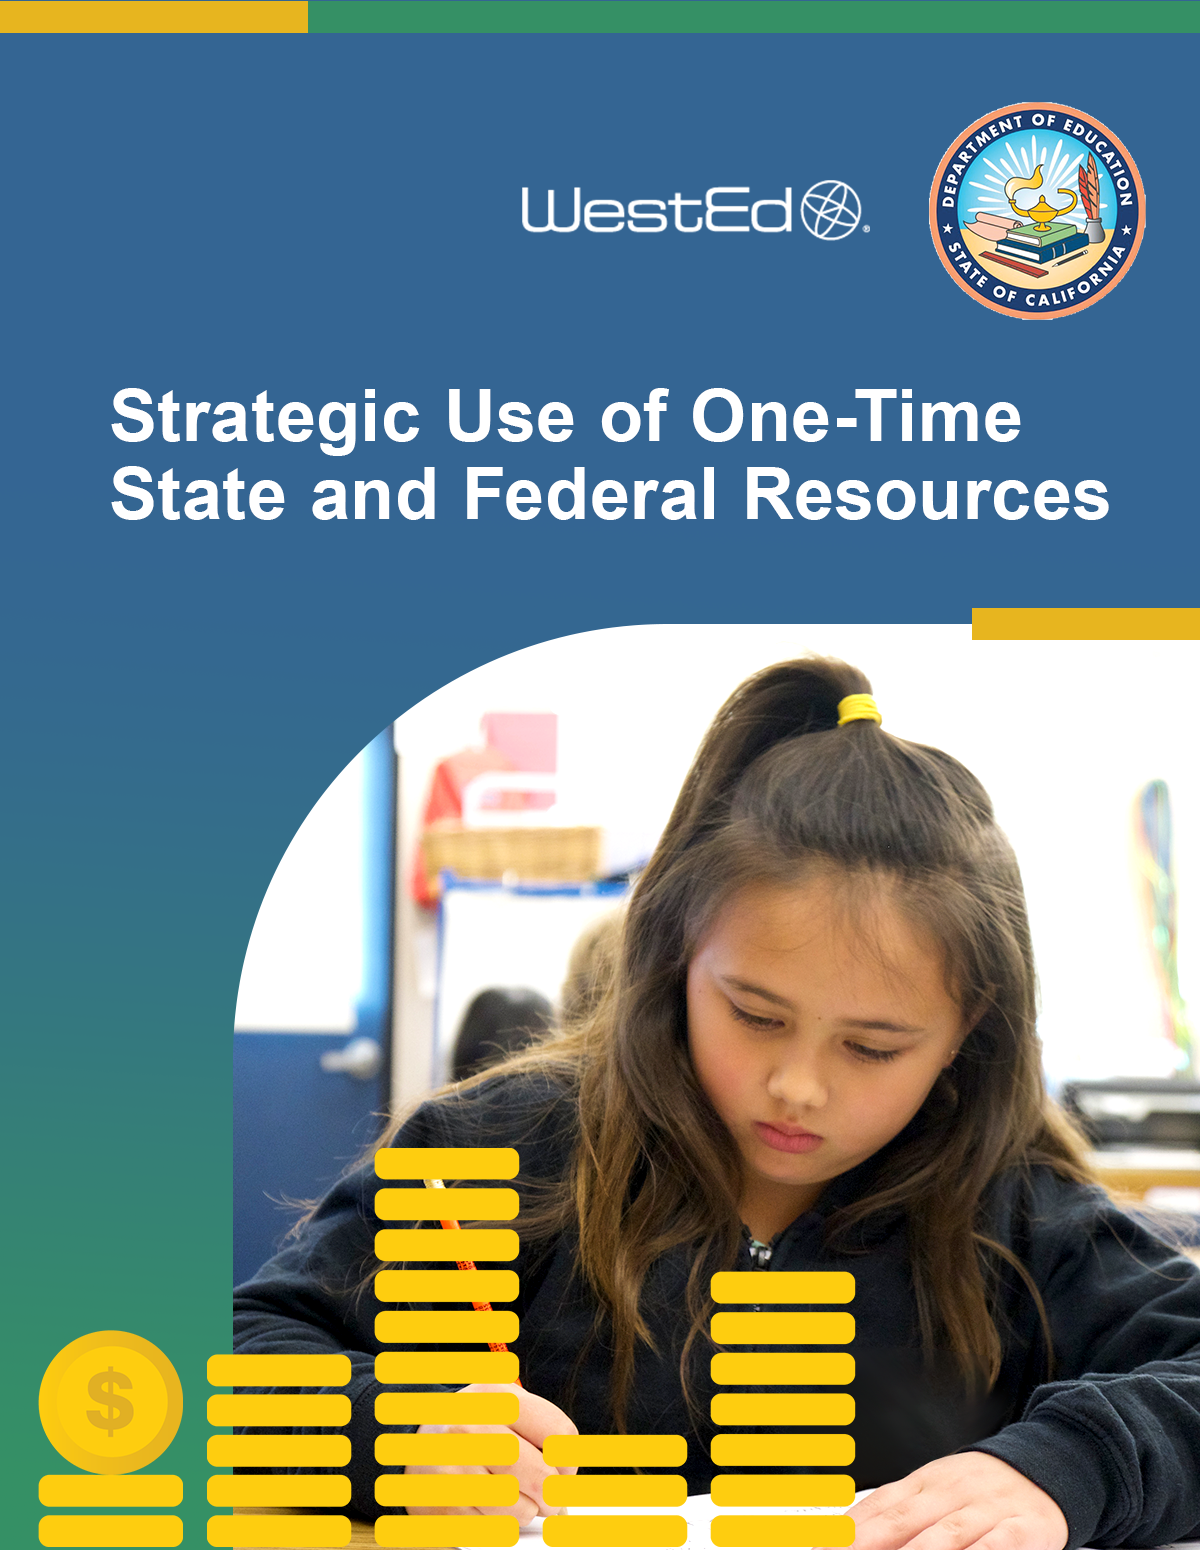 Strategic use of one-time state and federal resources